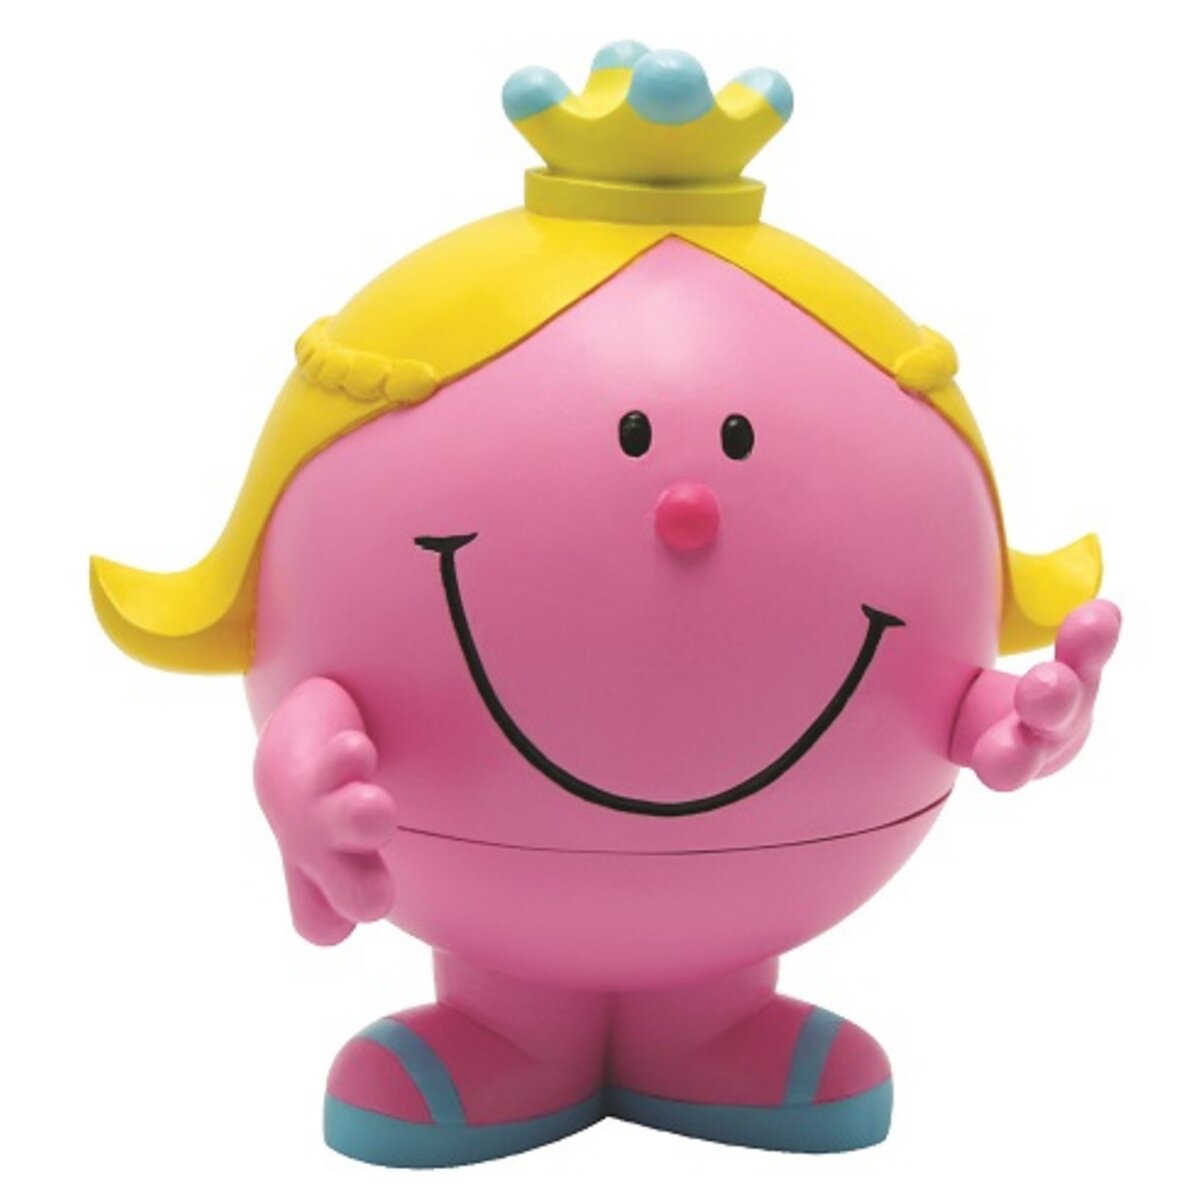 Aby Smile Figurine Mme Princesse